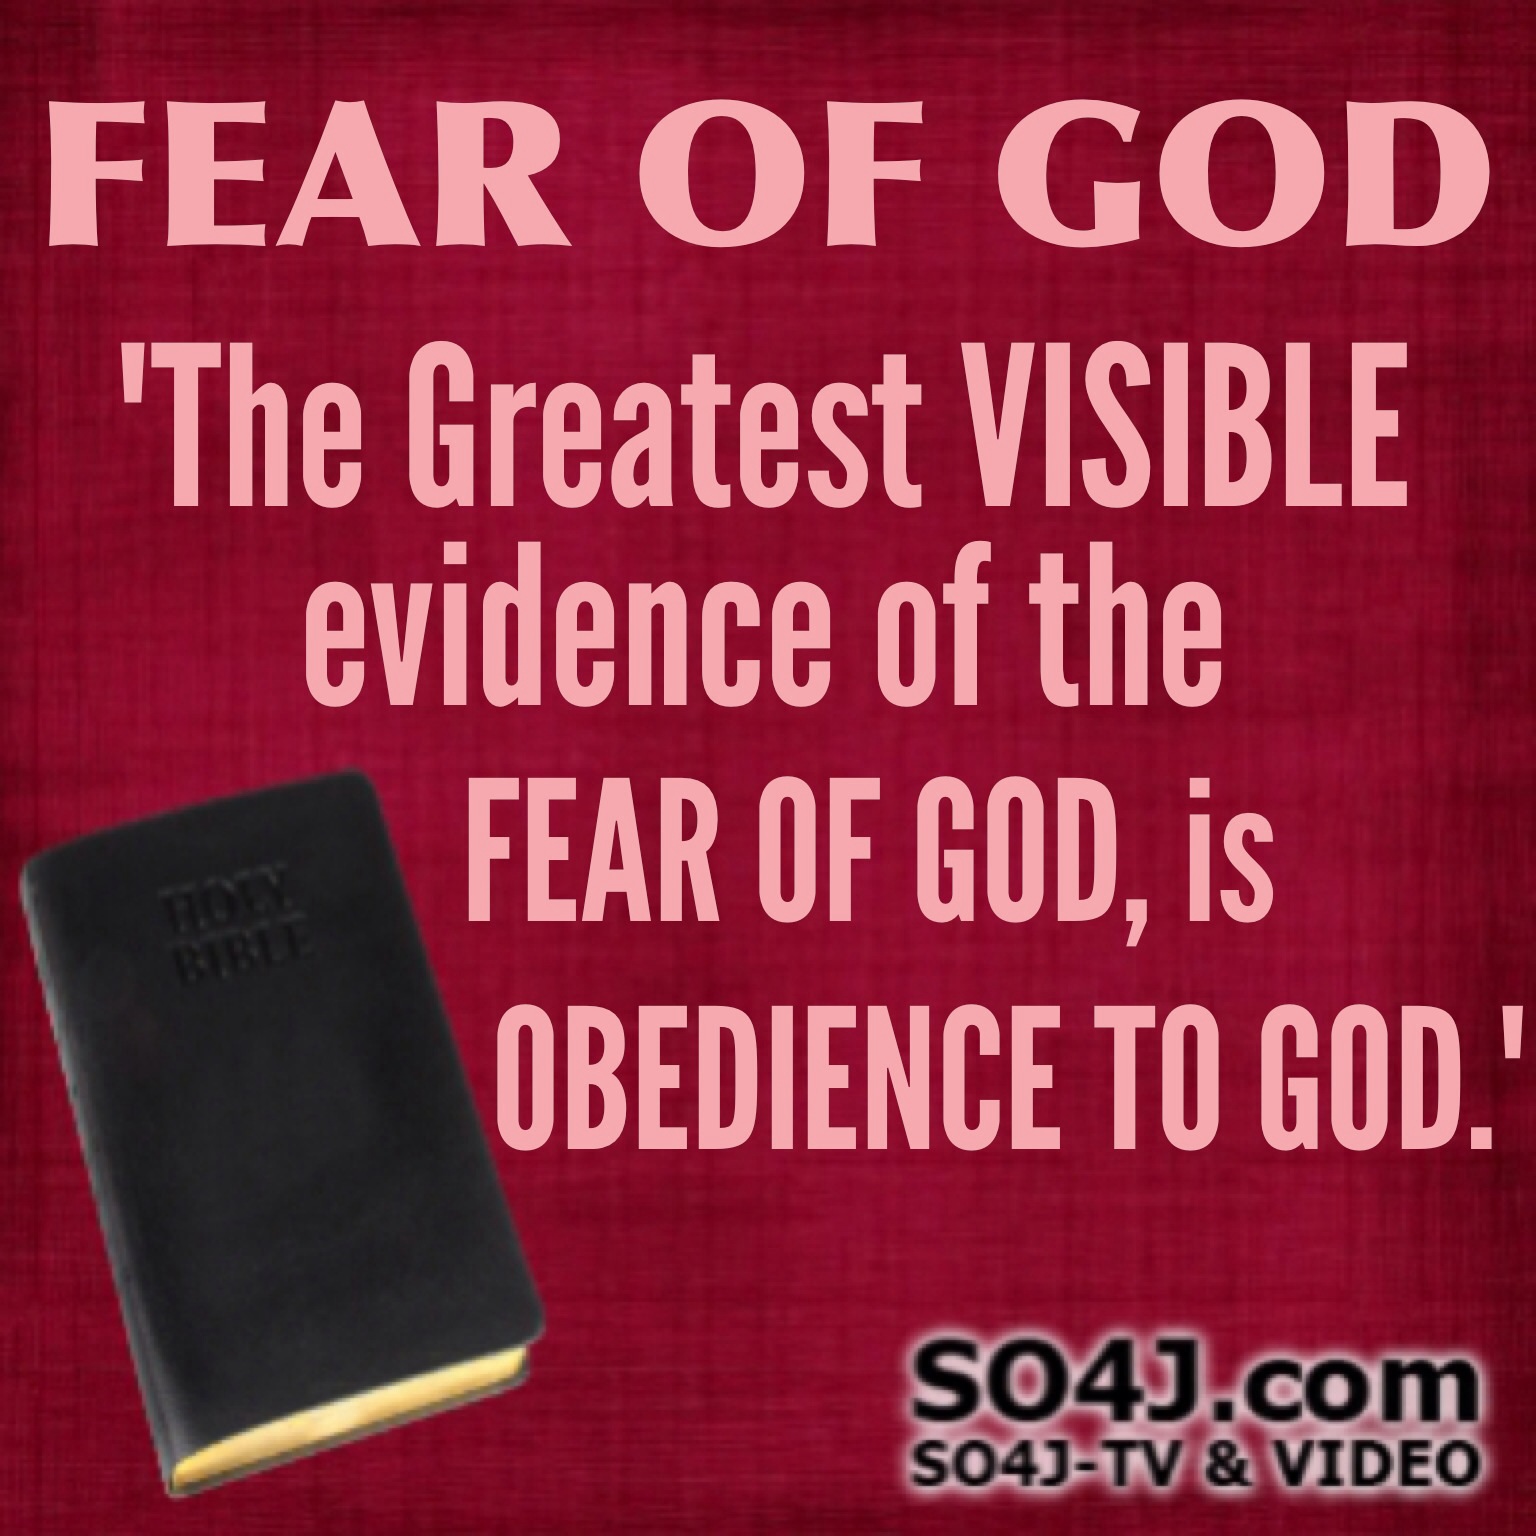 Fear God - What does it mean to Fear the Lord? | SO4J-TV - SO4J.com